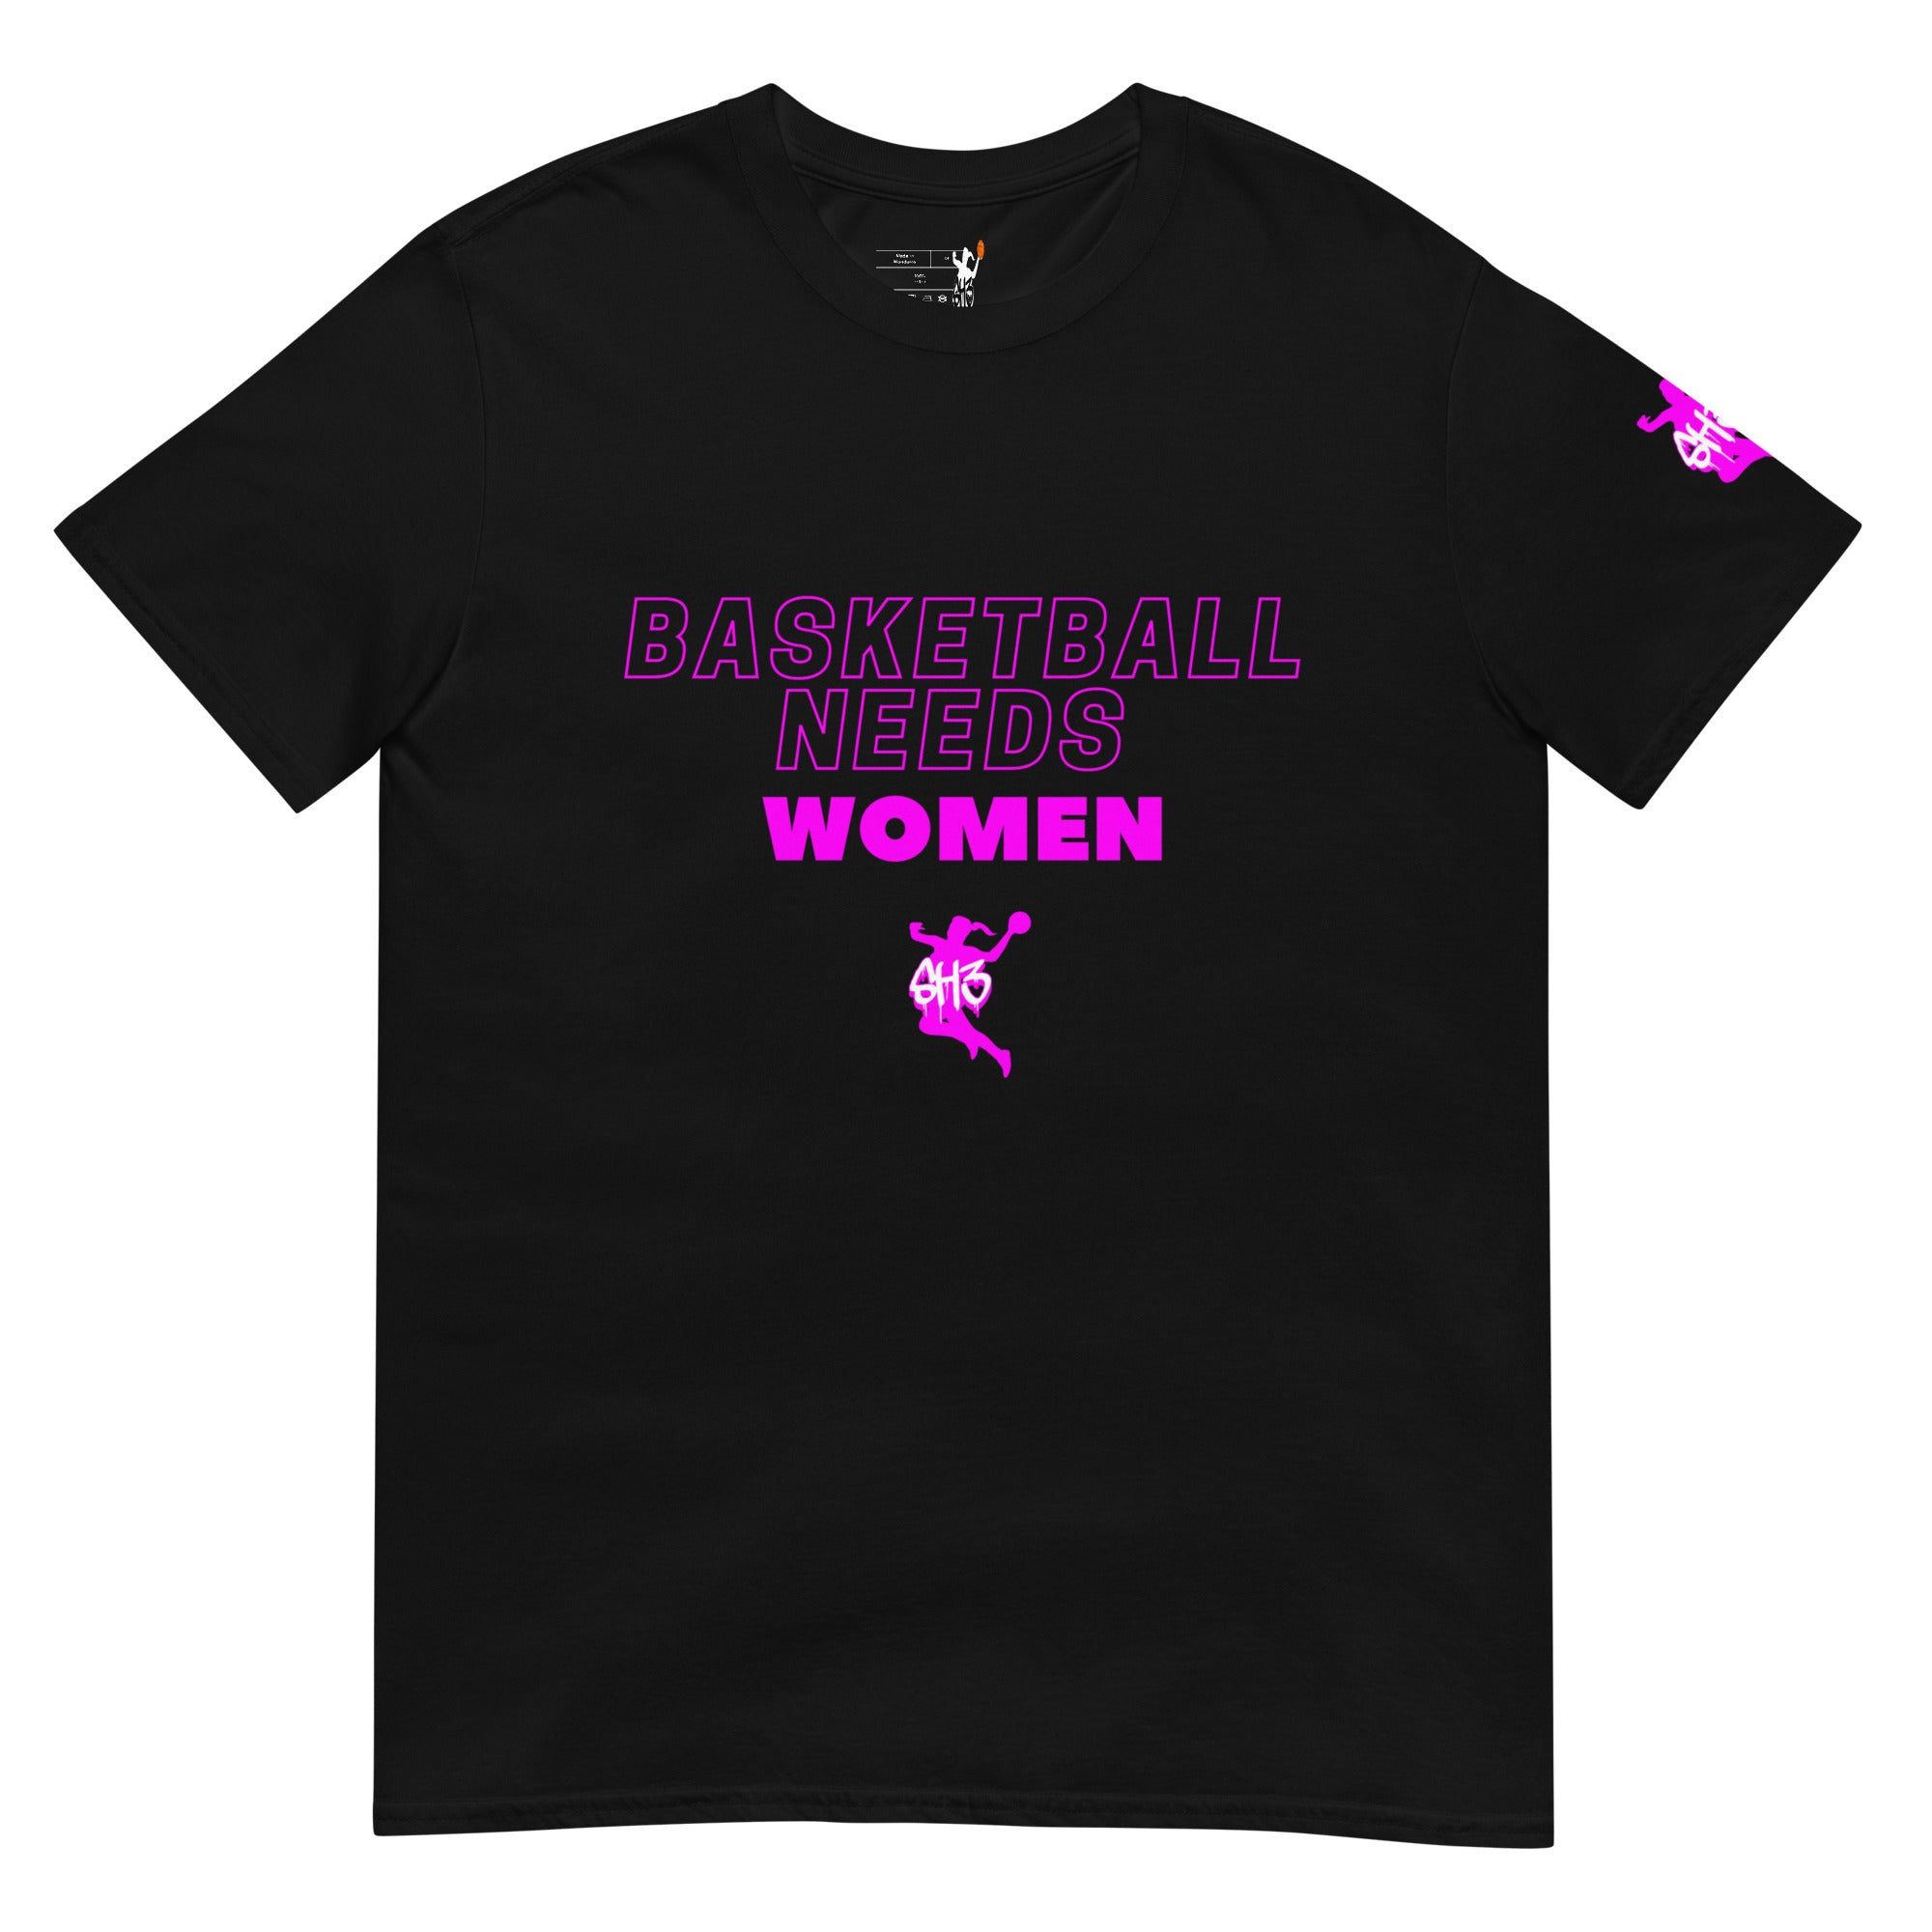 Women's Black/Pink Basketball Practice Jersey Game Gear Adult Size M